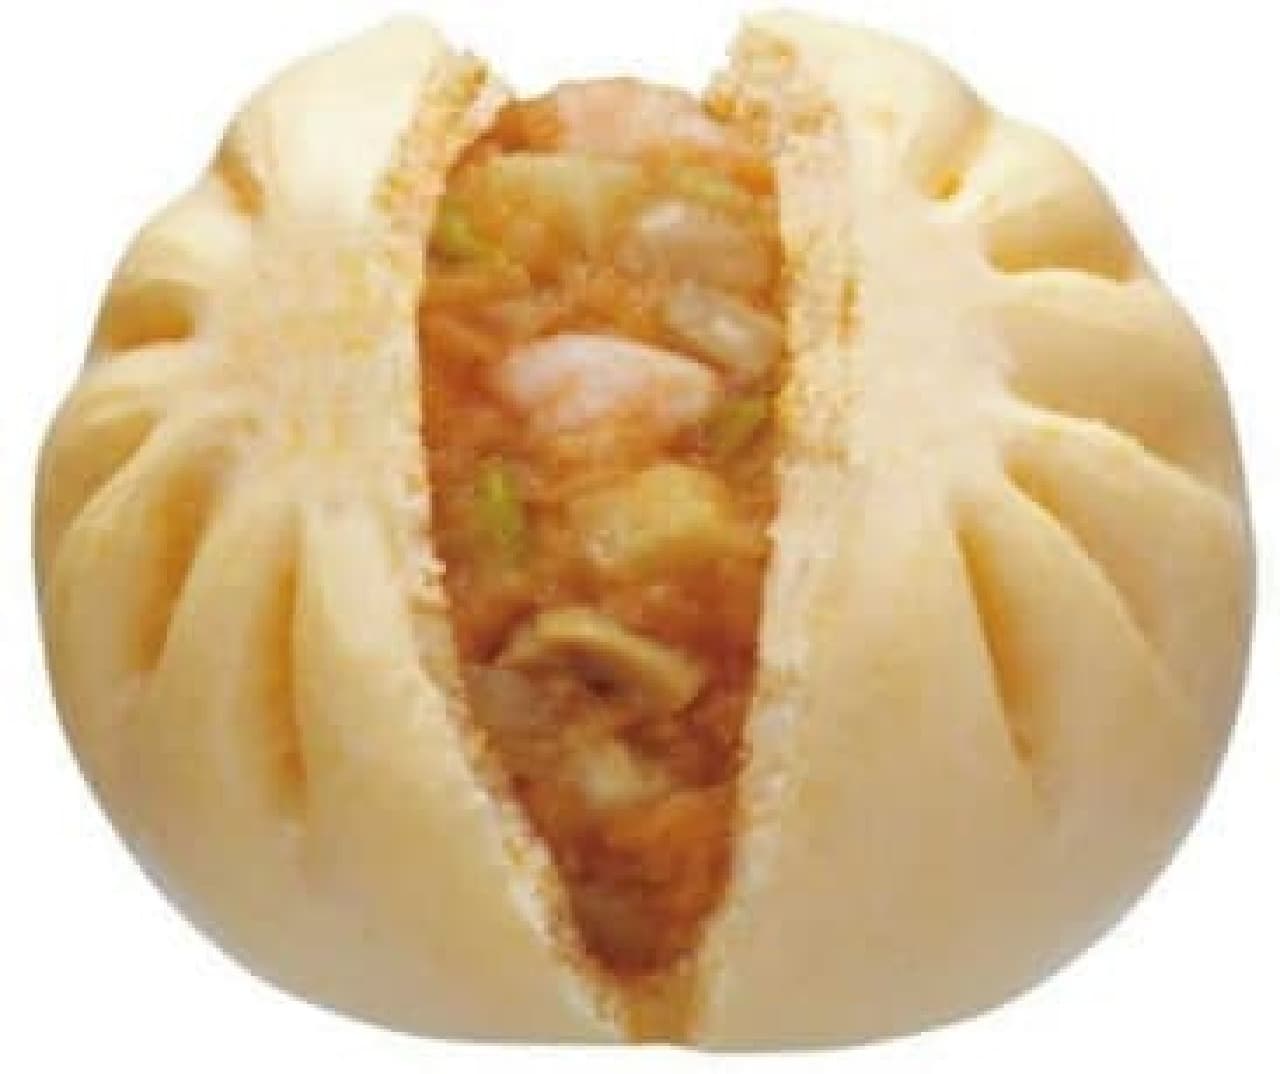 Tom Yum Kung has become a Chinese steamed bun!